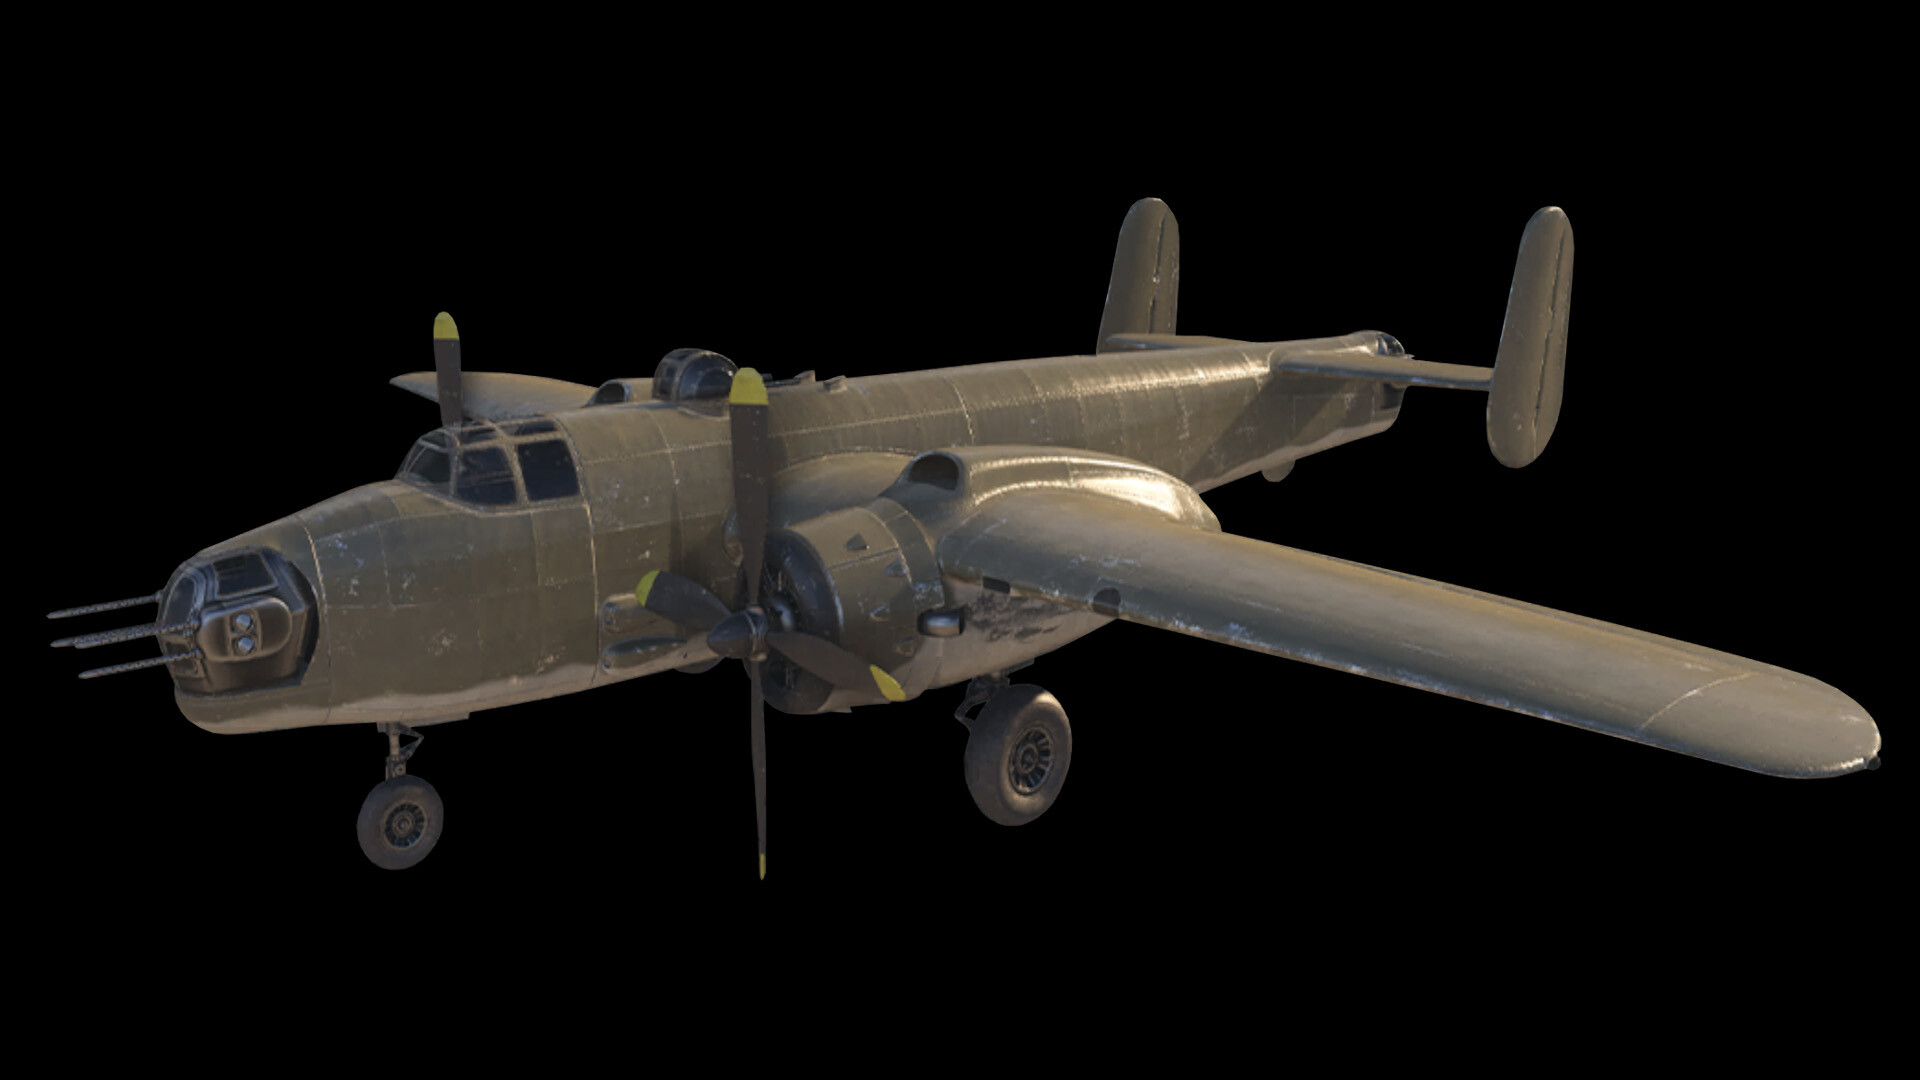 https://static.wikia.nocookie.net/callofduty/images/8/84/Bomber_Plane_Overview_WZ.jpg/revision/latest?cb=20220302132232